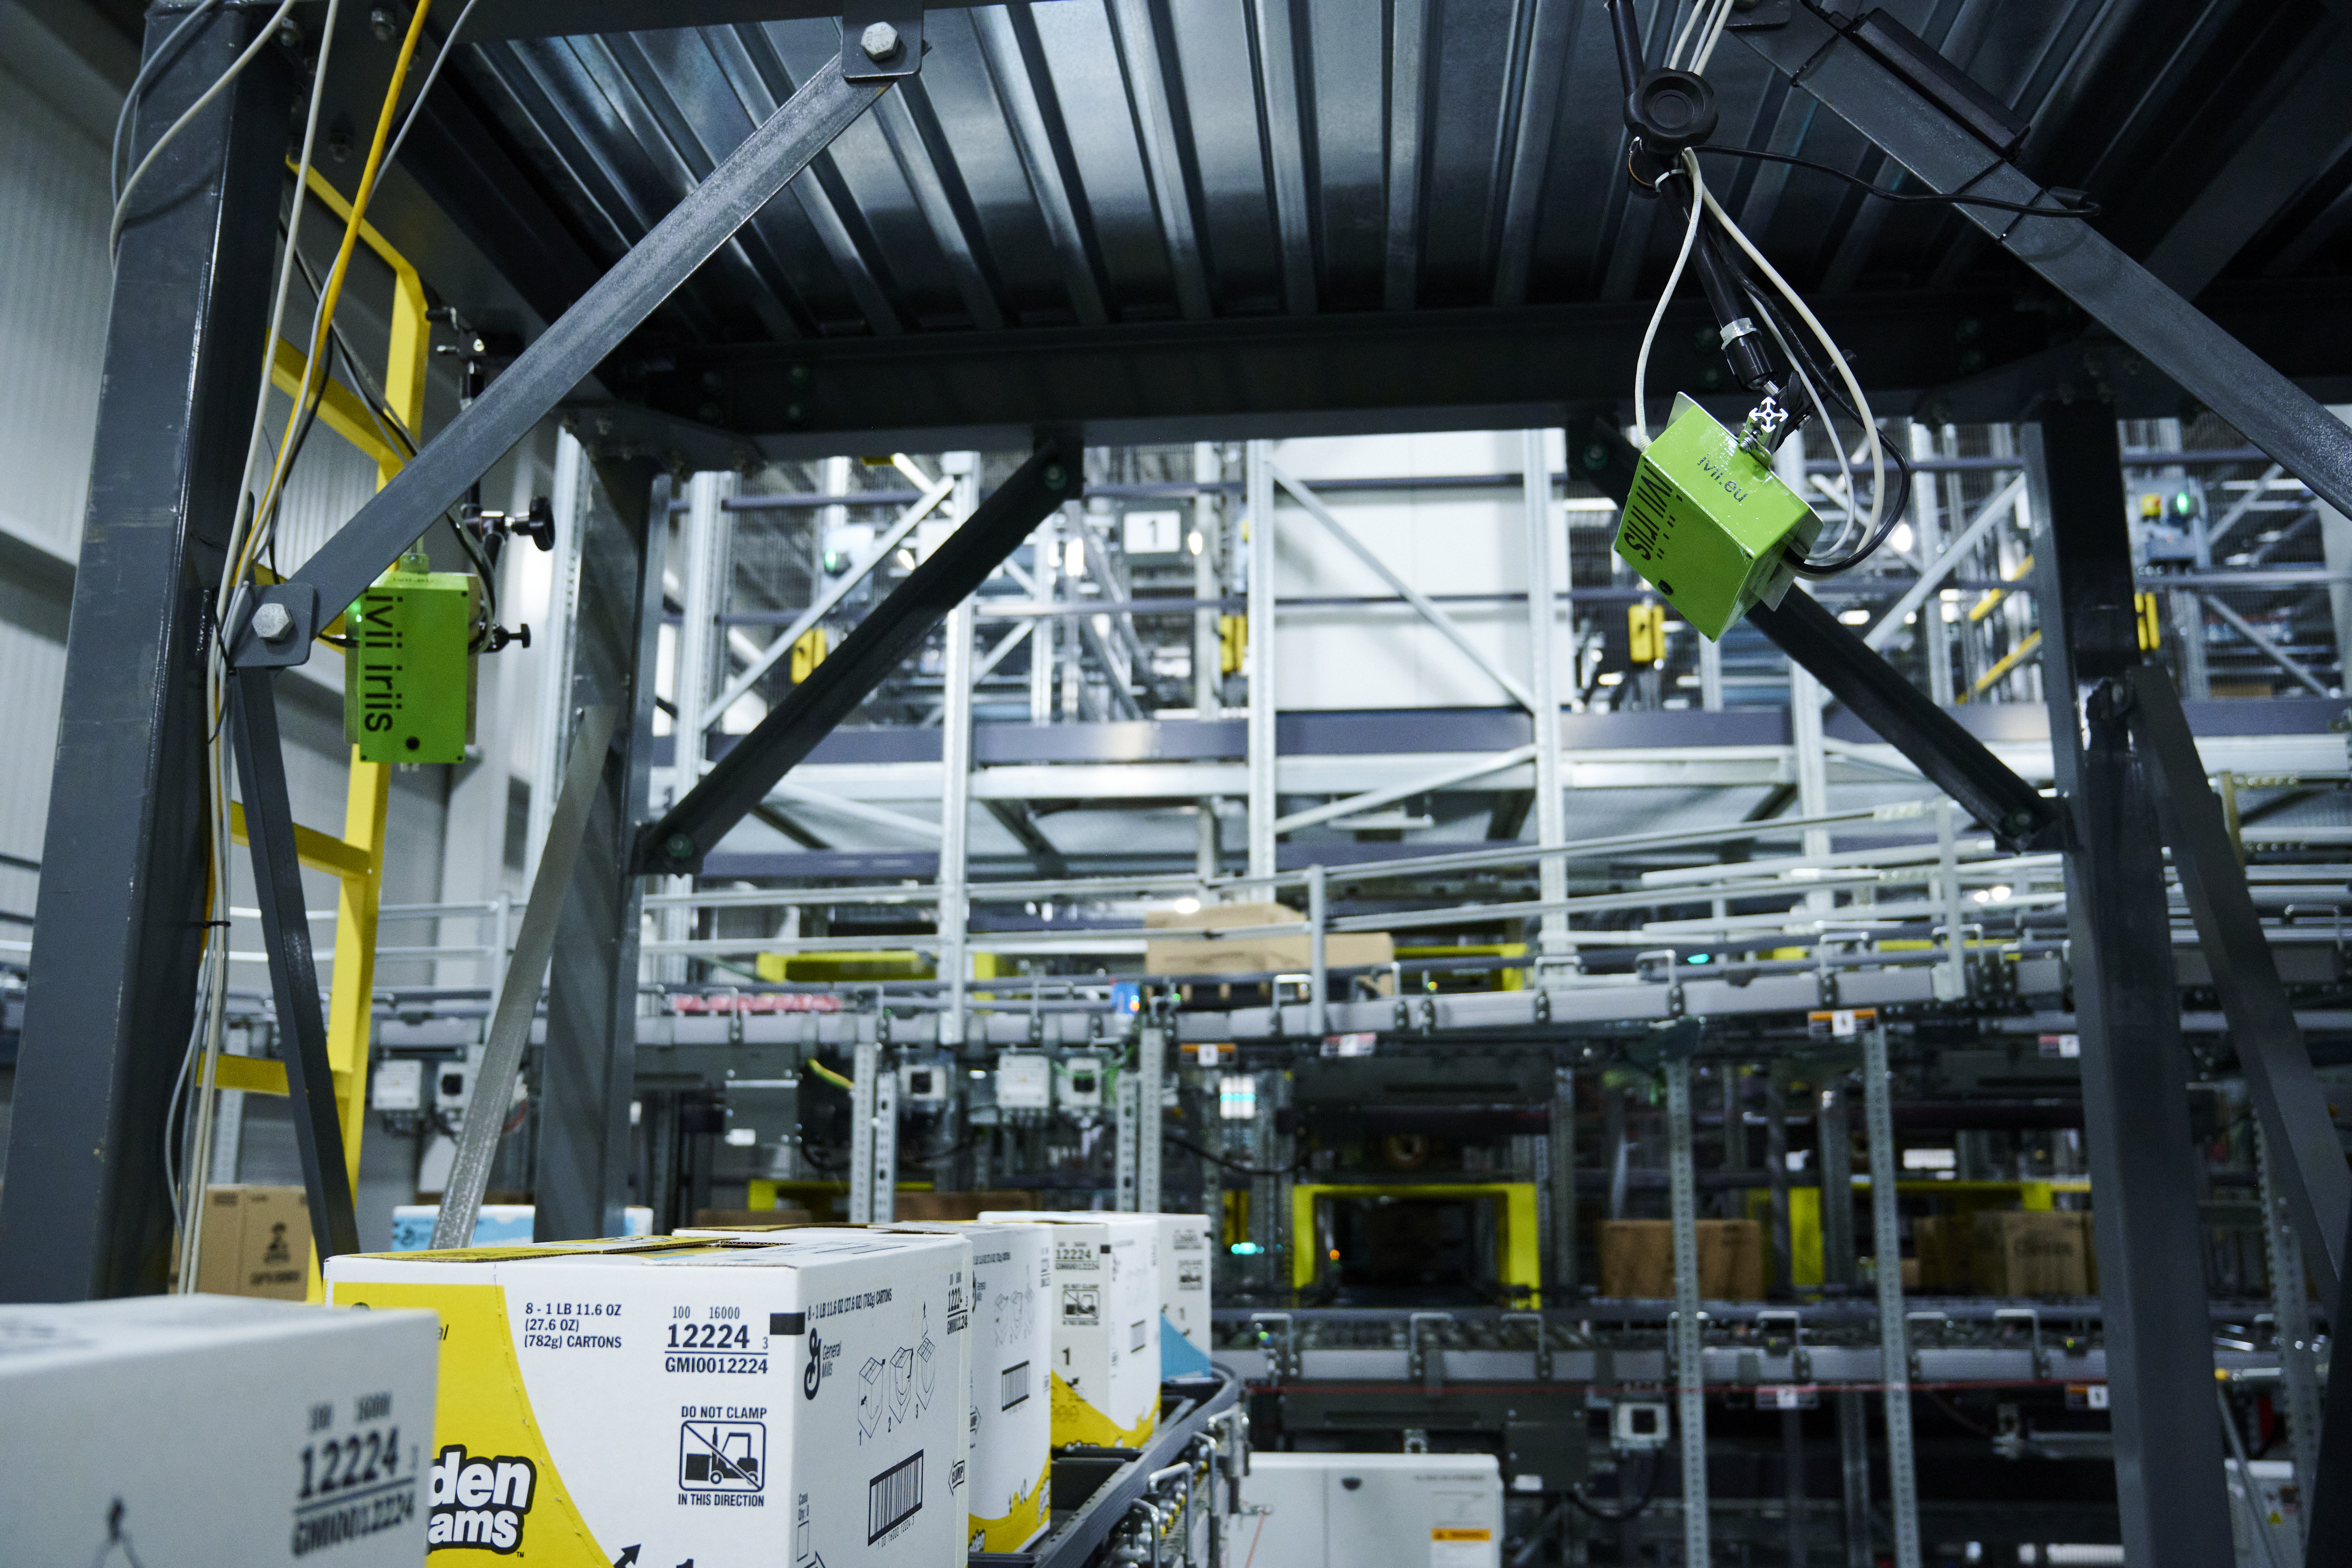 The image shows the ivii iriis vision system carrying out a comparison of the items arriving on the conveyor system.